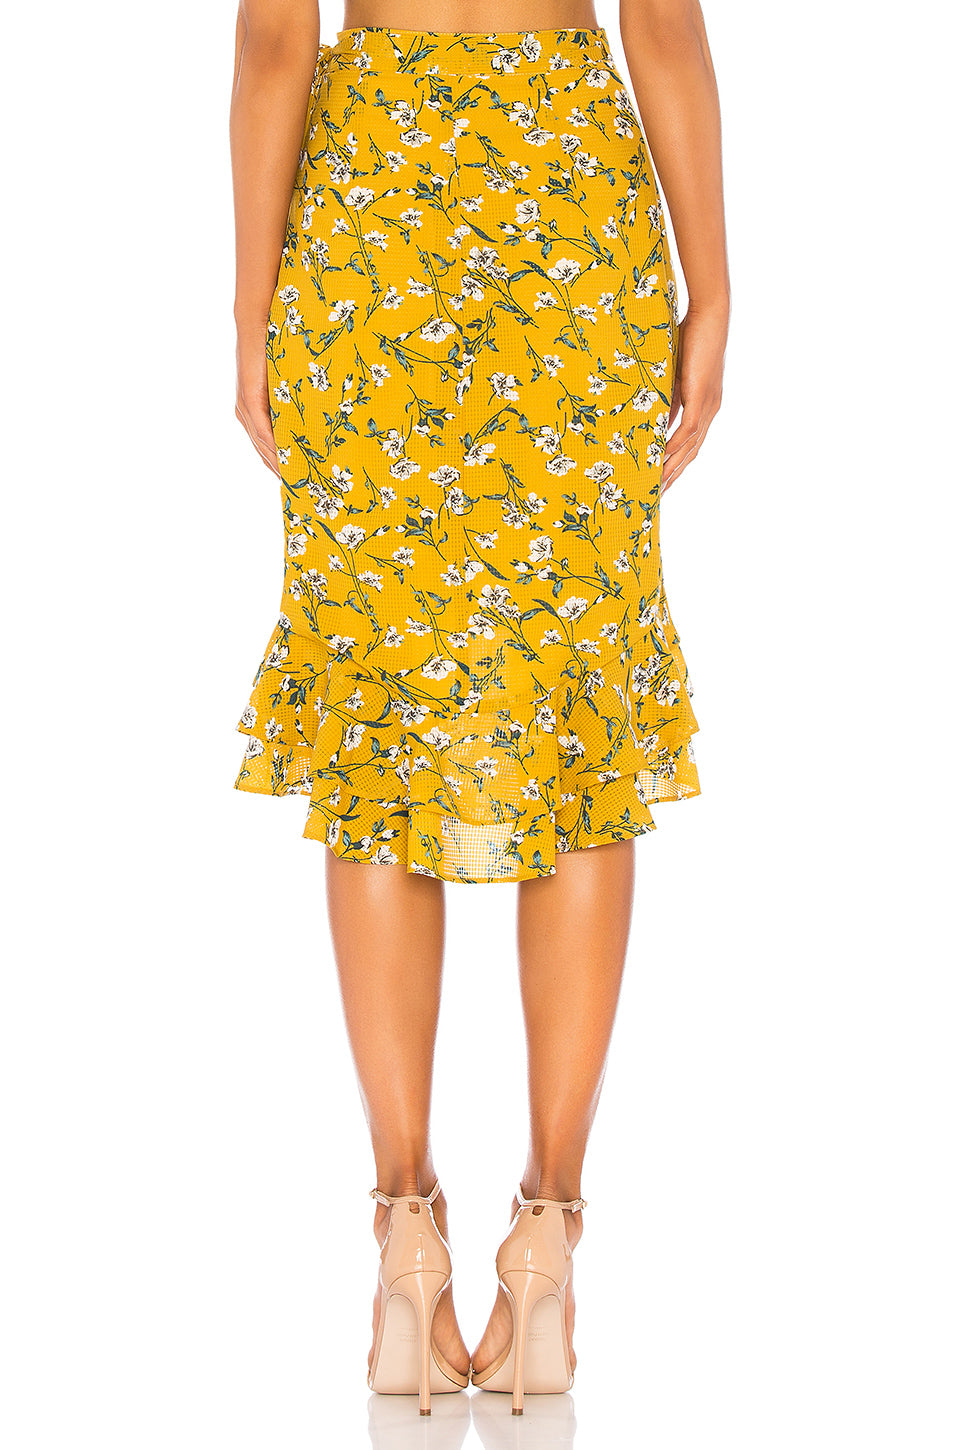 Veronica Skirt in YELLOW DOLLY FLORAL